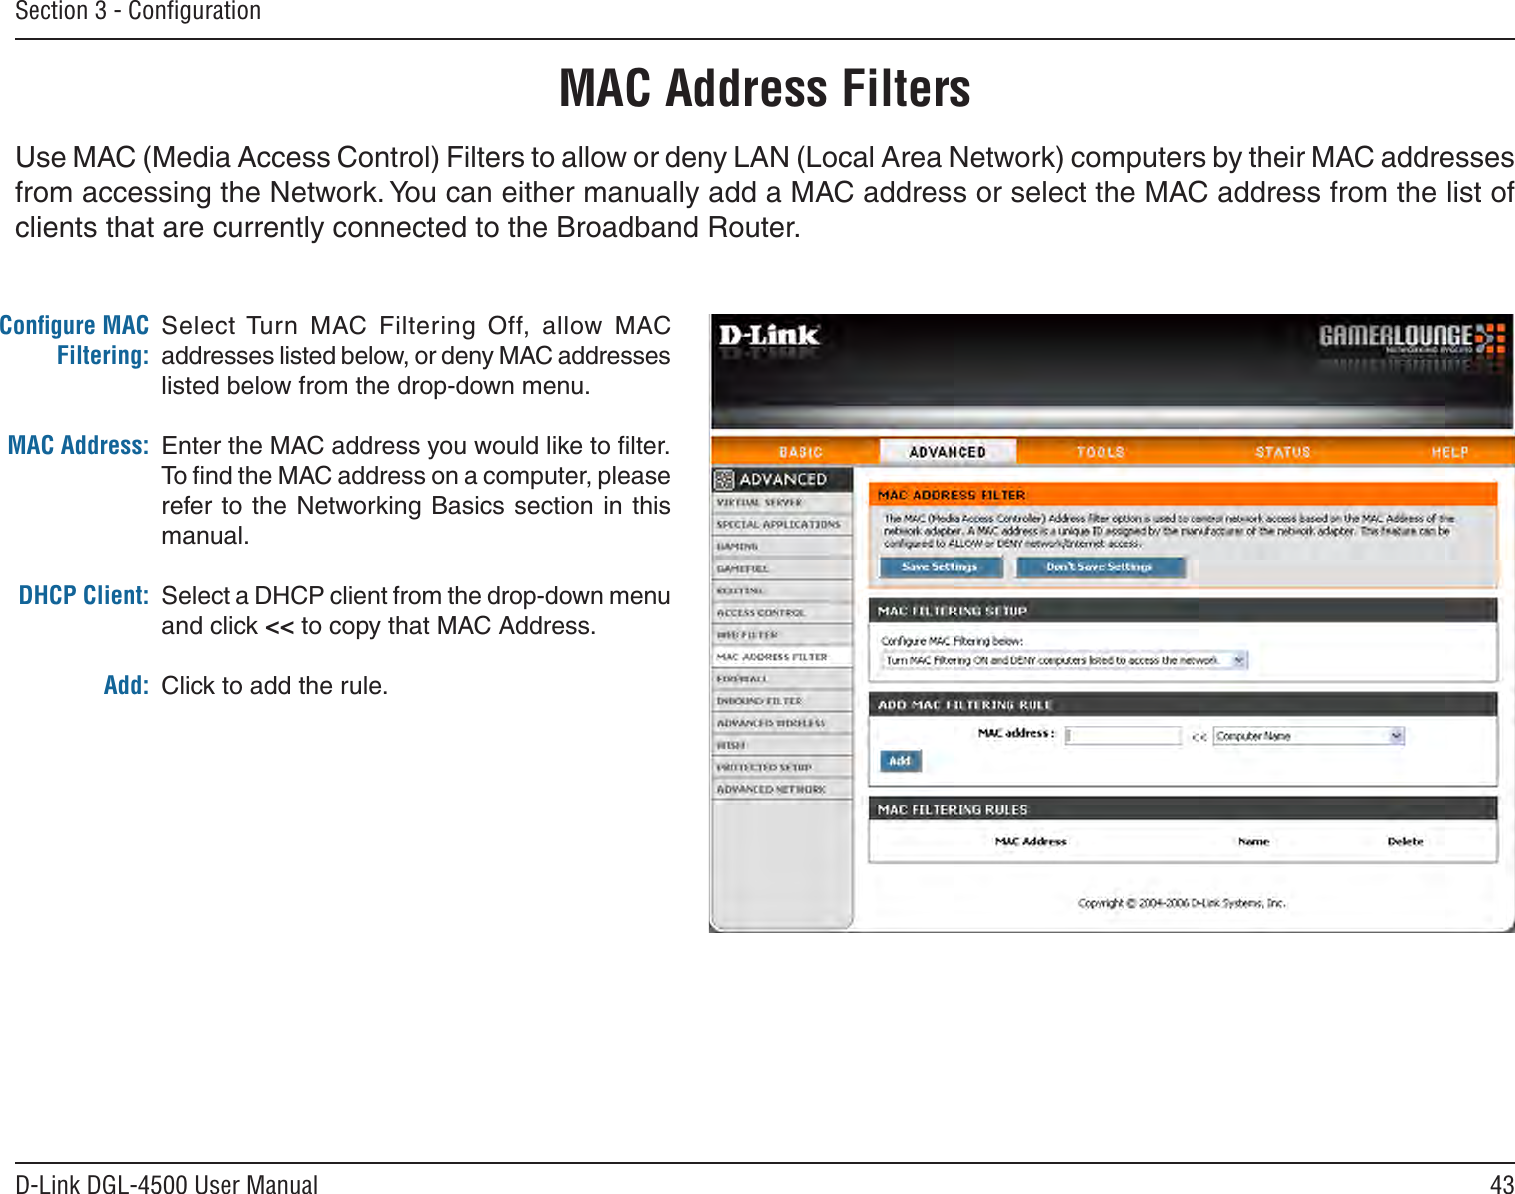 43D-Link DGL-4500 User ManualSection 3 - ConﬁgurationMAC Address FiltersSelect Turn  MAC  Filtering  Off,  allow  MAC addresses listed below, or deny MAC addresses listed below from the drop-down menu. Enter the MAC address you would like to ﬁlter.To ﬁnd the MAC address on a computer, please refer to the  Networking  Basics section in  this manual. Select a DHCP client from the drop-down menu and click &lt;&lt; to copy that MAC Address. Click to add the rule.Conﬁgure MAC Filtering:MAC Address:DHCP Client:Add:Use MAC (Media Access Control) Filters to allow or deny LAN (Local Area Network) computers by their MAC addresses from accessing the Network. You can either manually add a MAC address or select the MAC address from the list of clients that are currently connected to the Broadband Router.